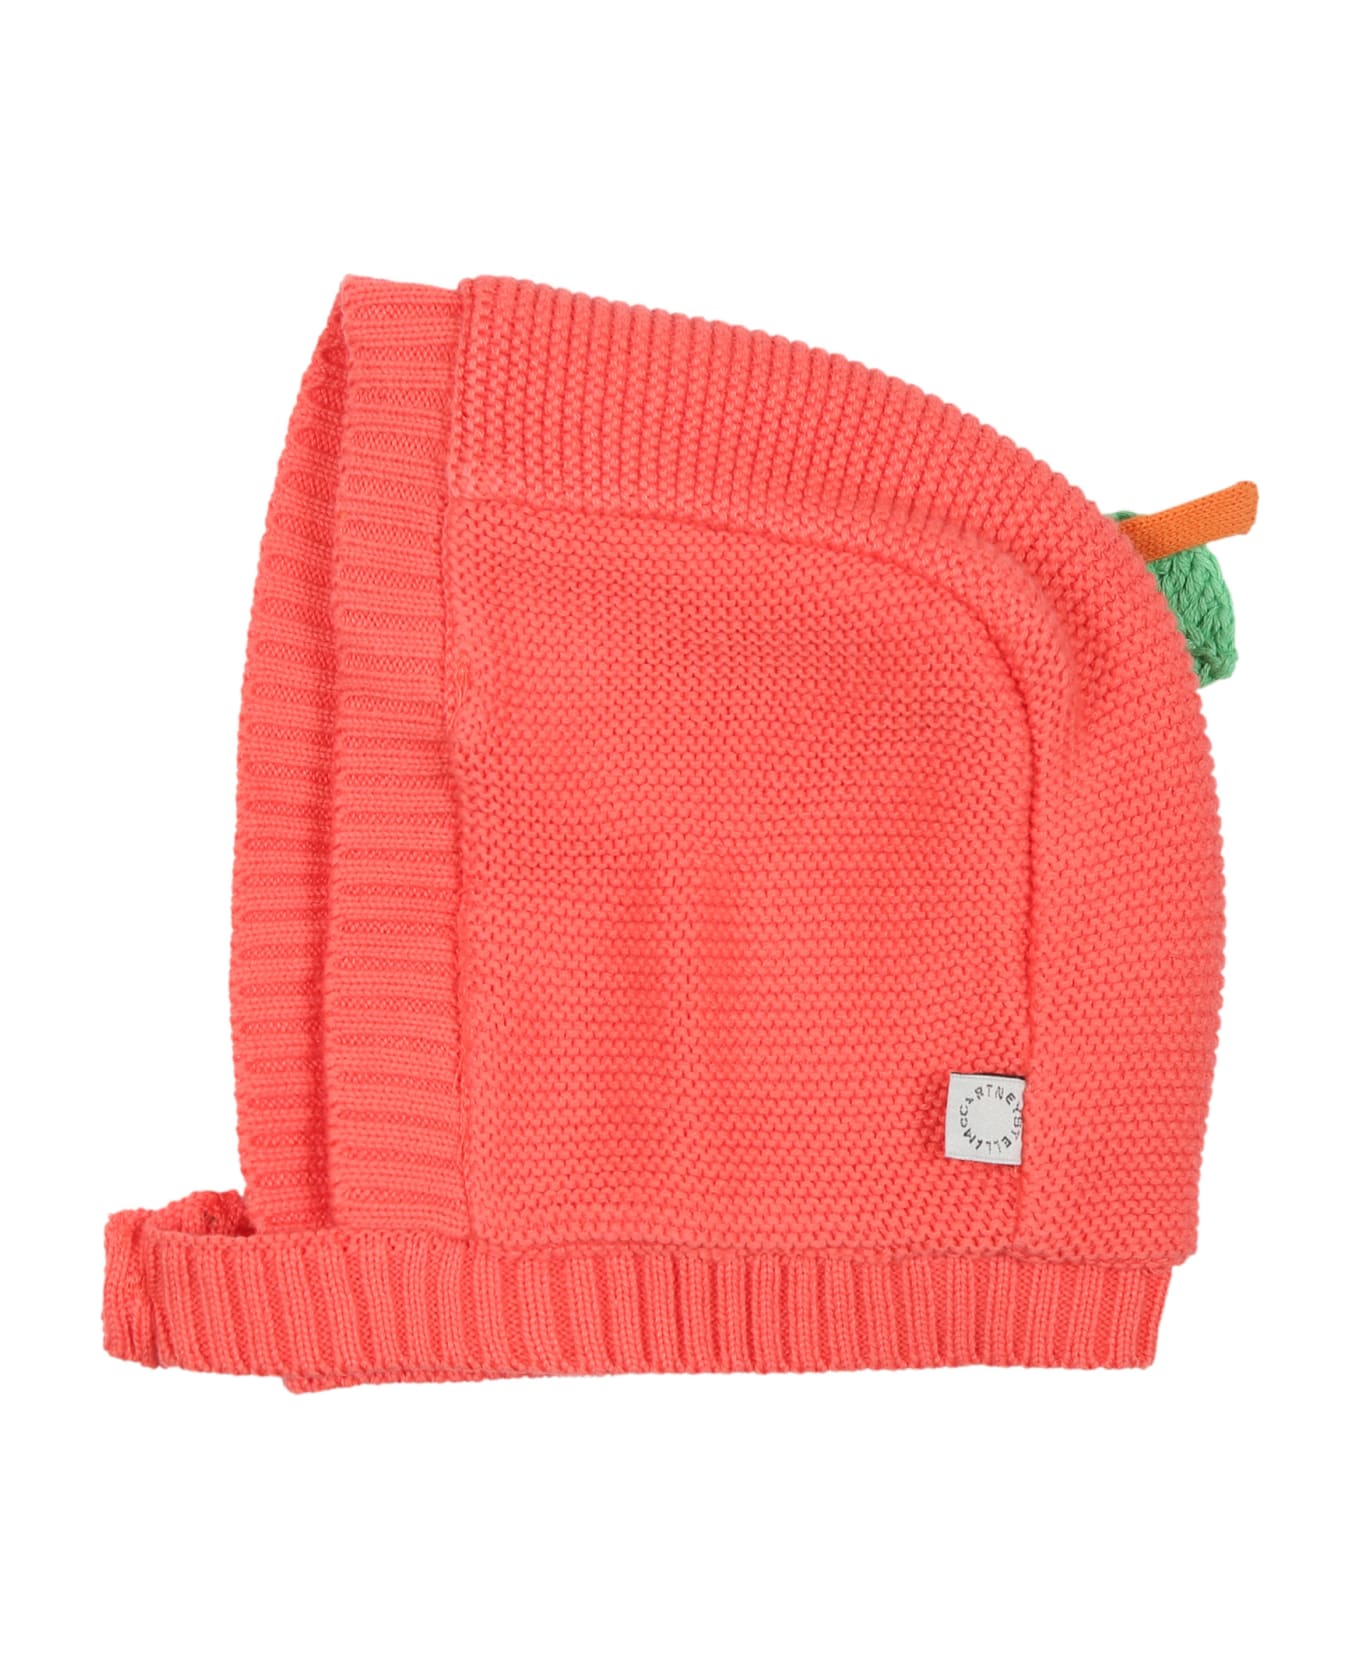 Stella McCartney Kids Red Hat For Baby Girl - Red アクセサリー＆ギフト